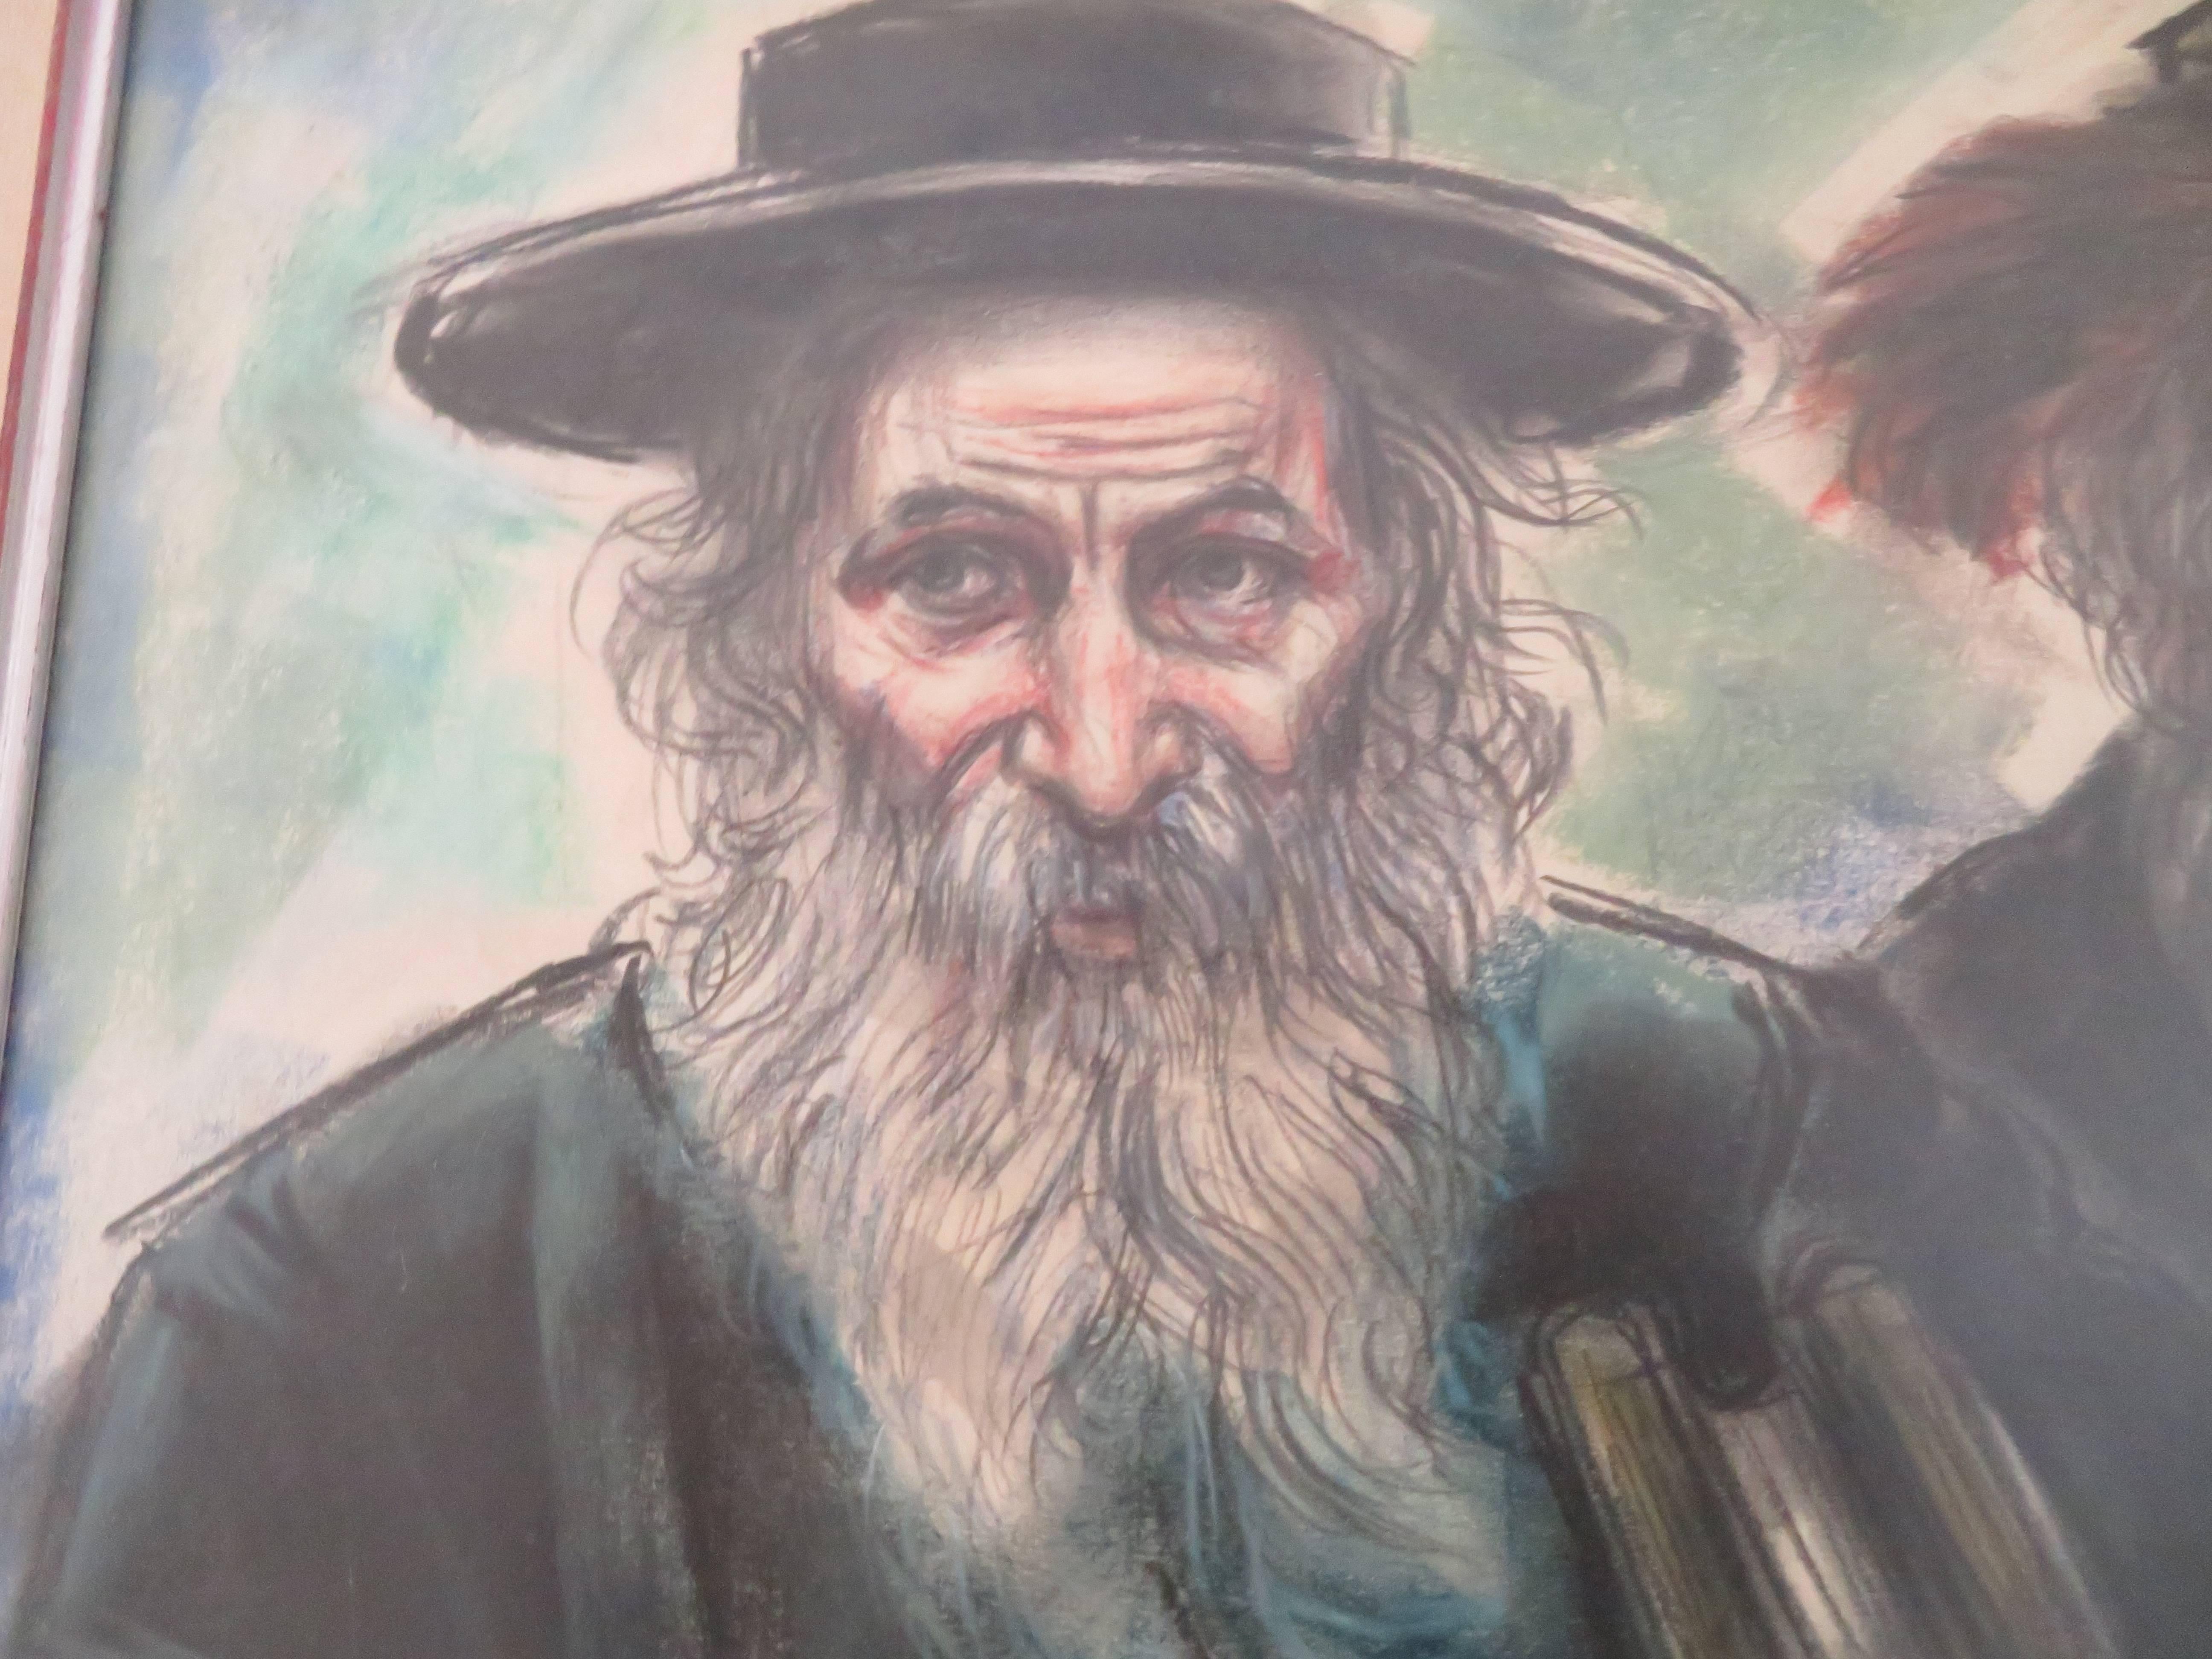 Wonderful Freda L. Reiter pastel sketch of two Rabbis, a favourite subject matter of the artist-signed and dated 1976.
Freda L. Reiter was a courtroom sketch artist and did art for the Philadelphia Inquirer and worked as a TV sketch artist. Showing